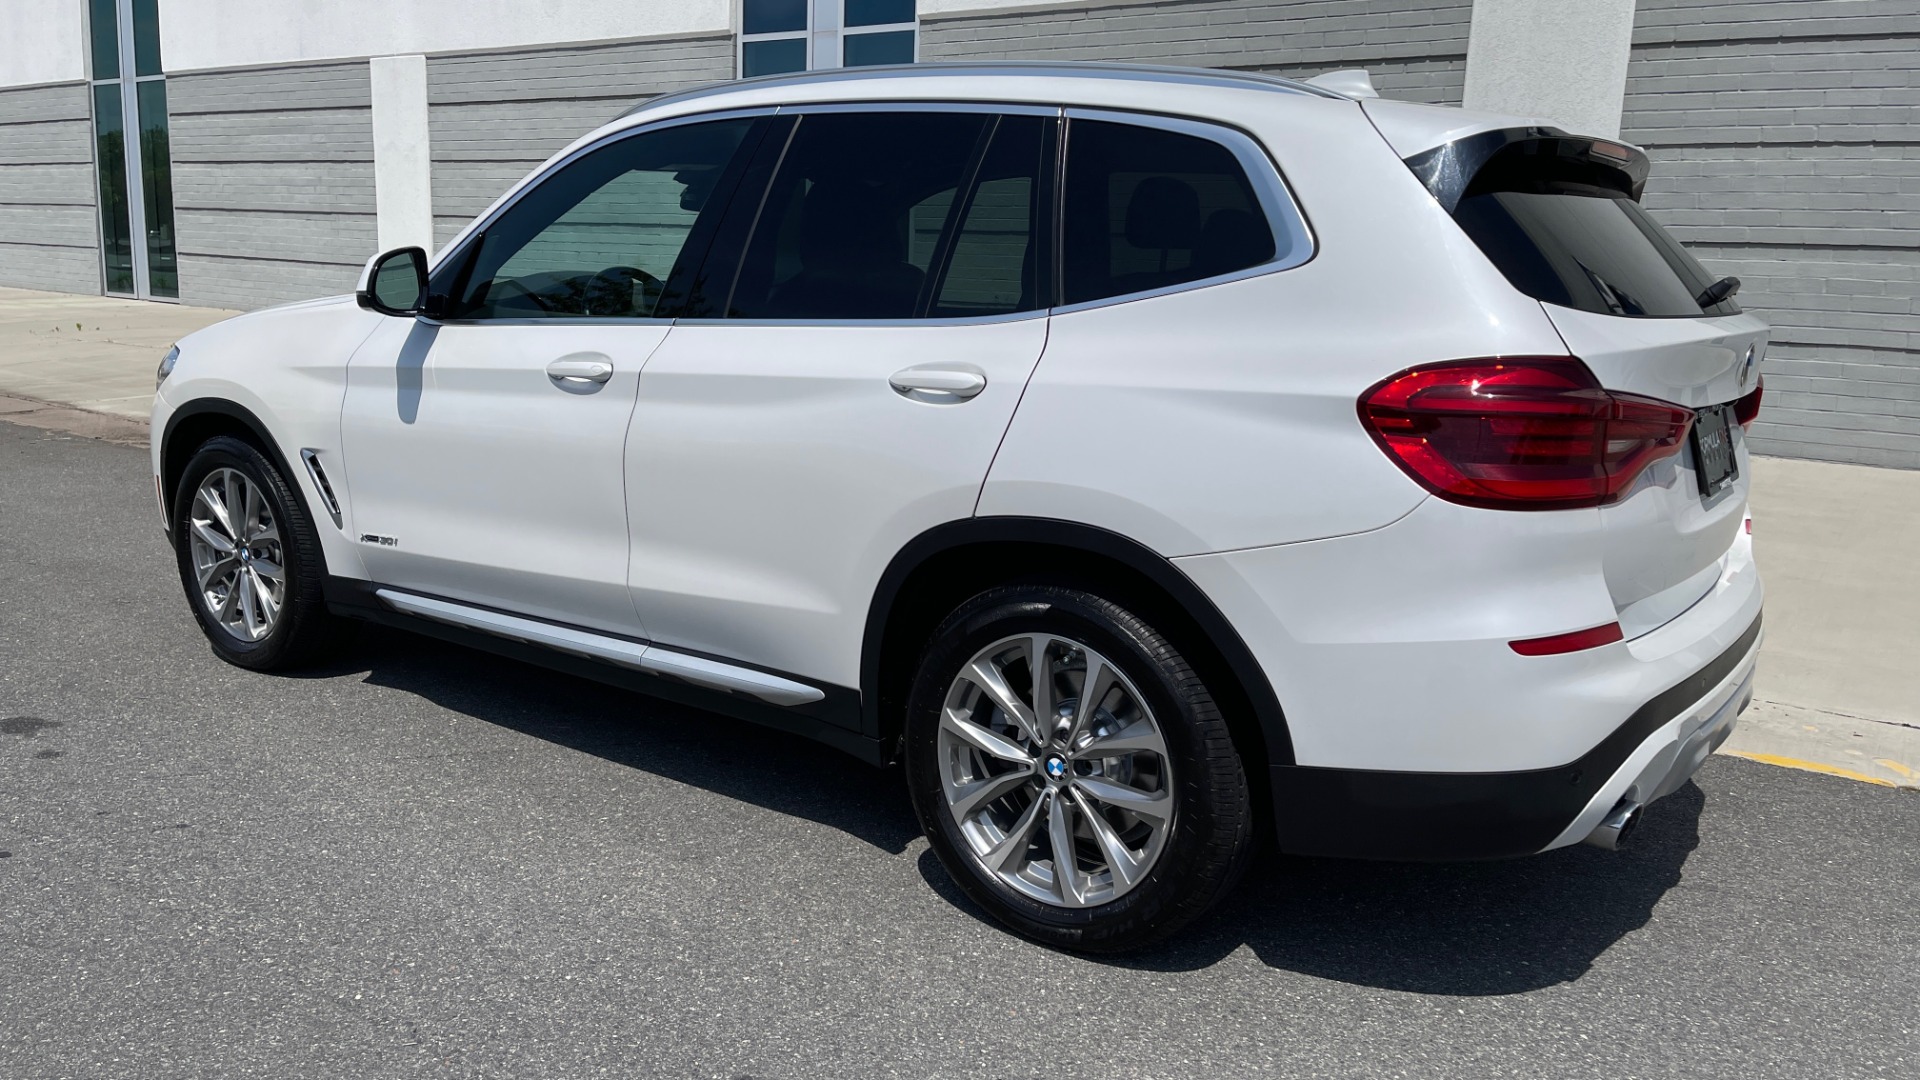 Used 2018 BMW X3 XDRIVE30I PREMIUM / NAV / DRVR ASST / CONV PKG / SUNROOF / REARVIEW for sale Sold at Formula Imports in Charlotte NC 28227 6